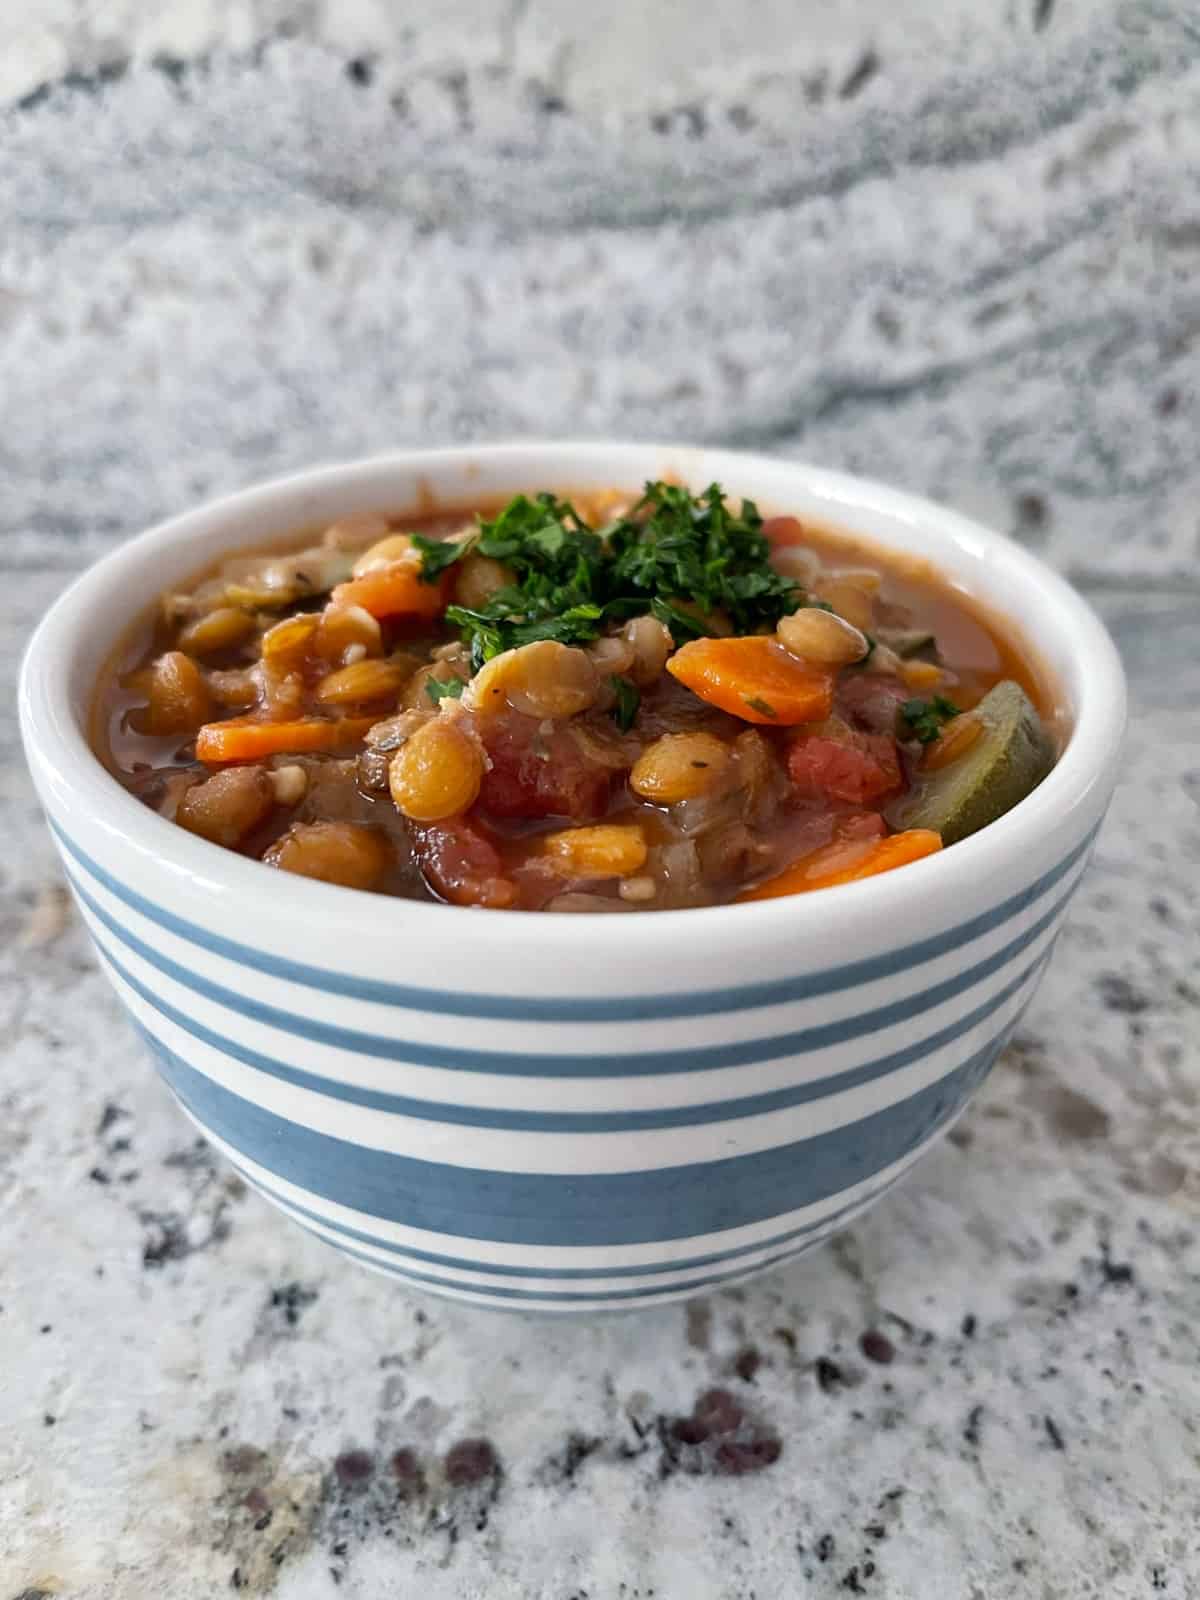 Lentil Minestrone garnished with chopped Italian parsley in blue striped bowl on granite.